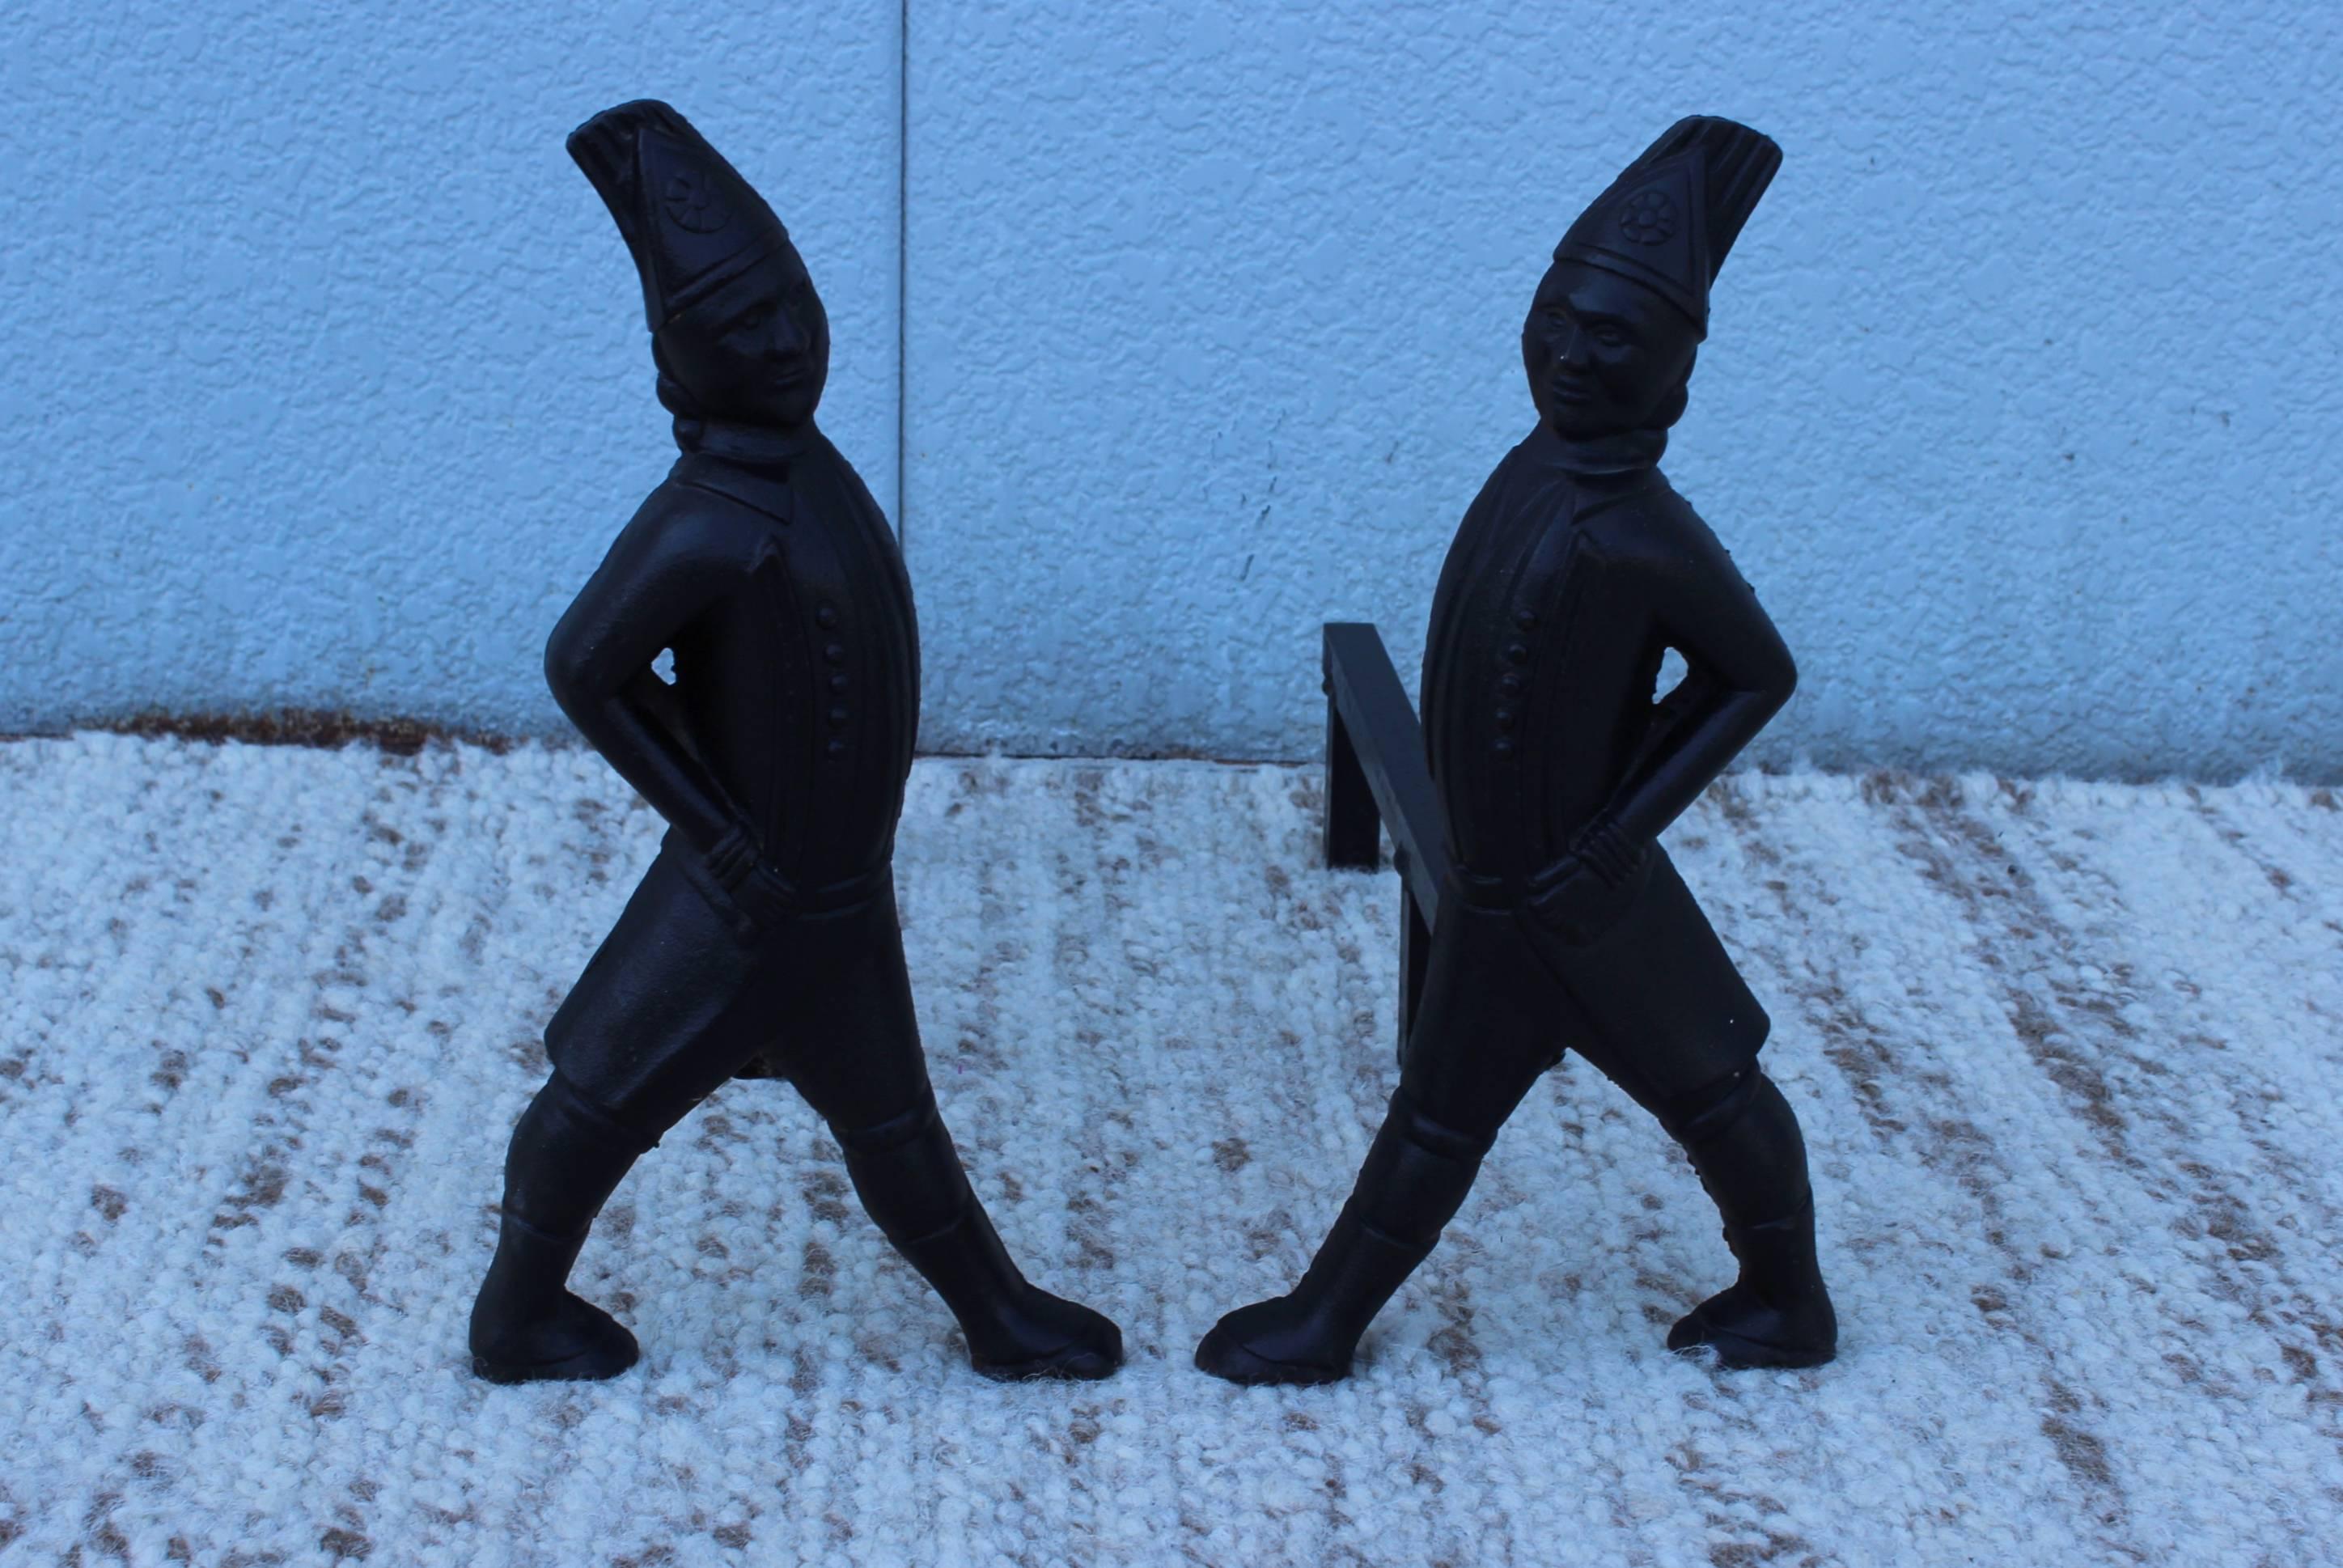 1940s Hessian soldiers cast iron andirons.